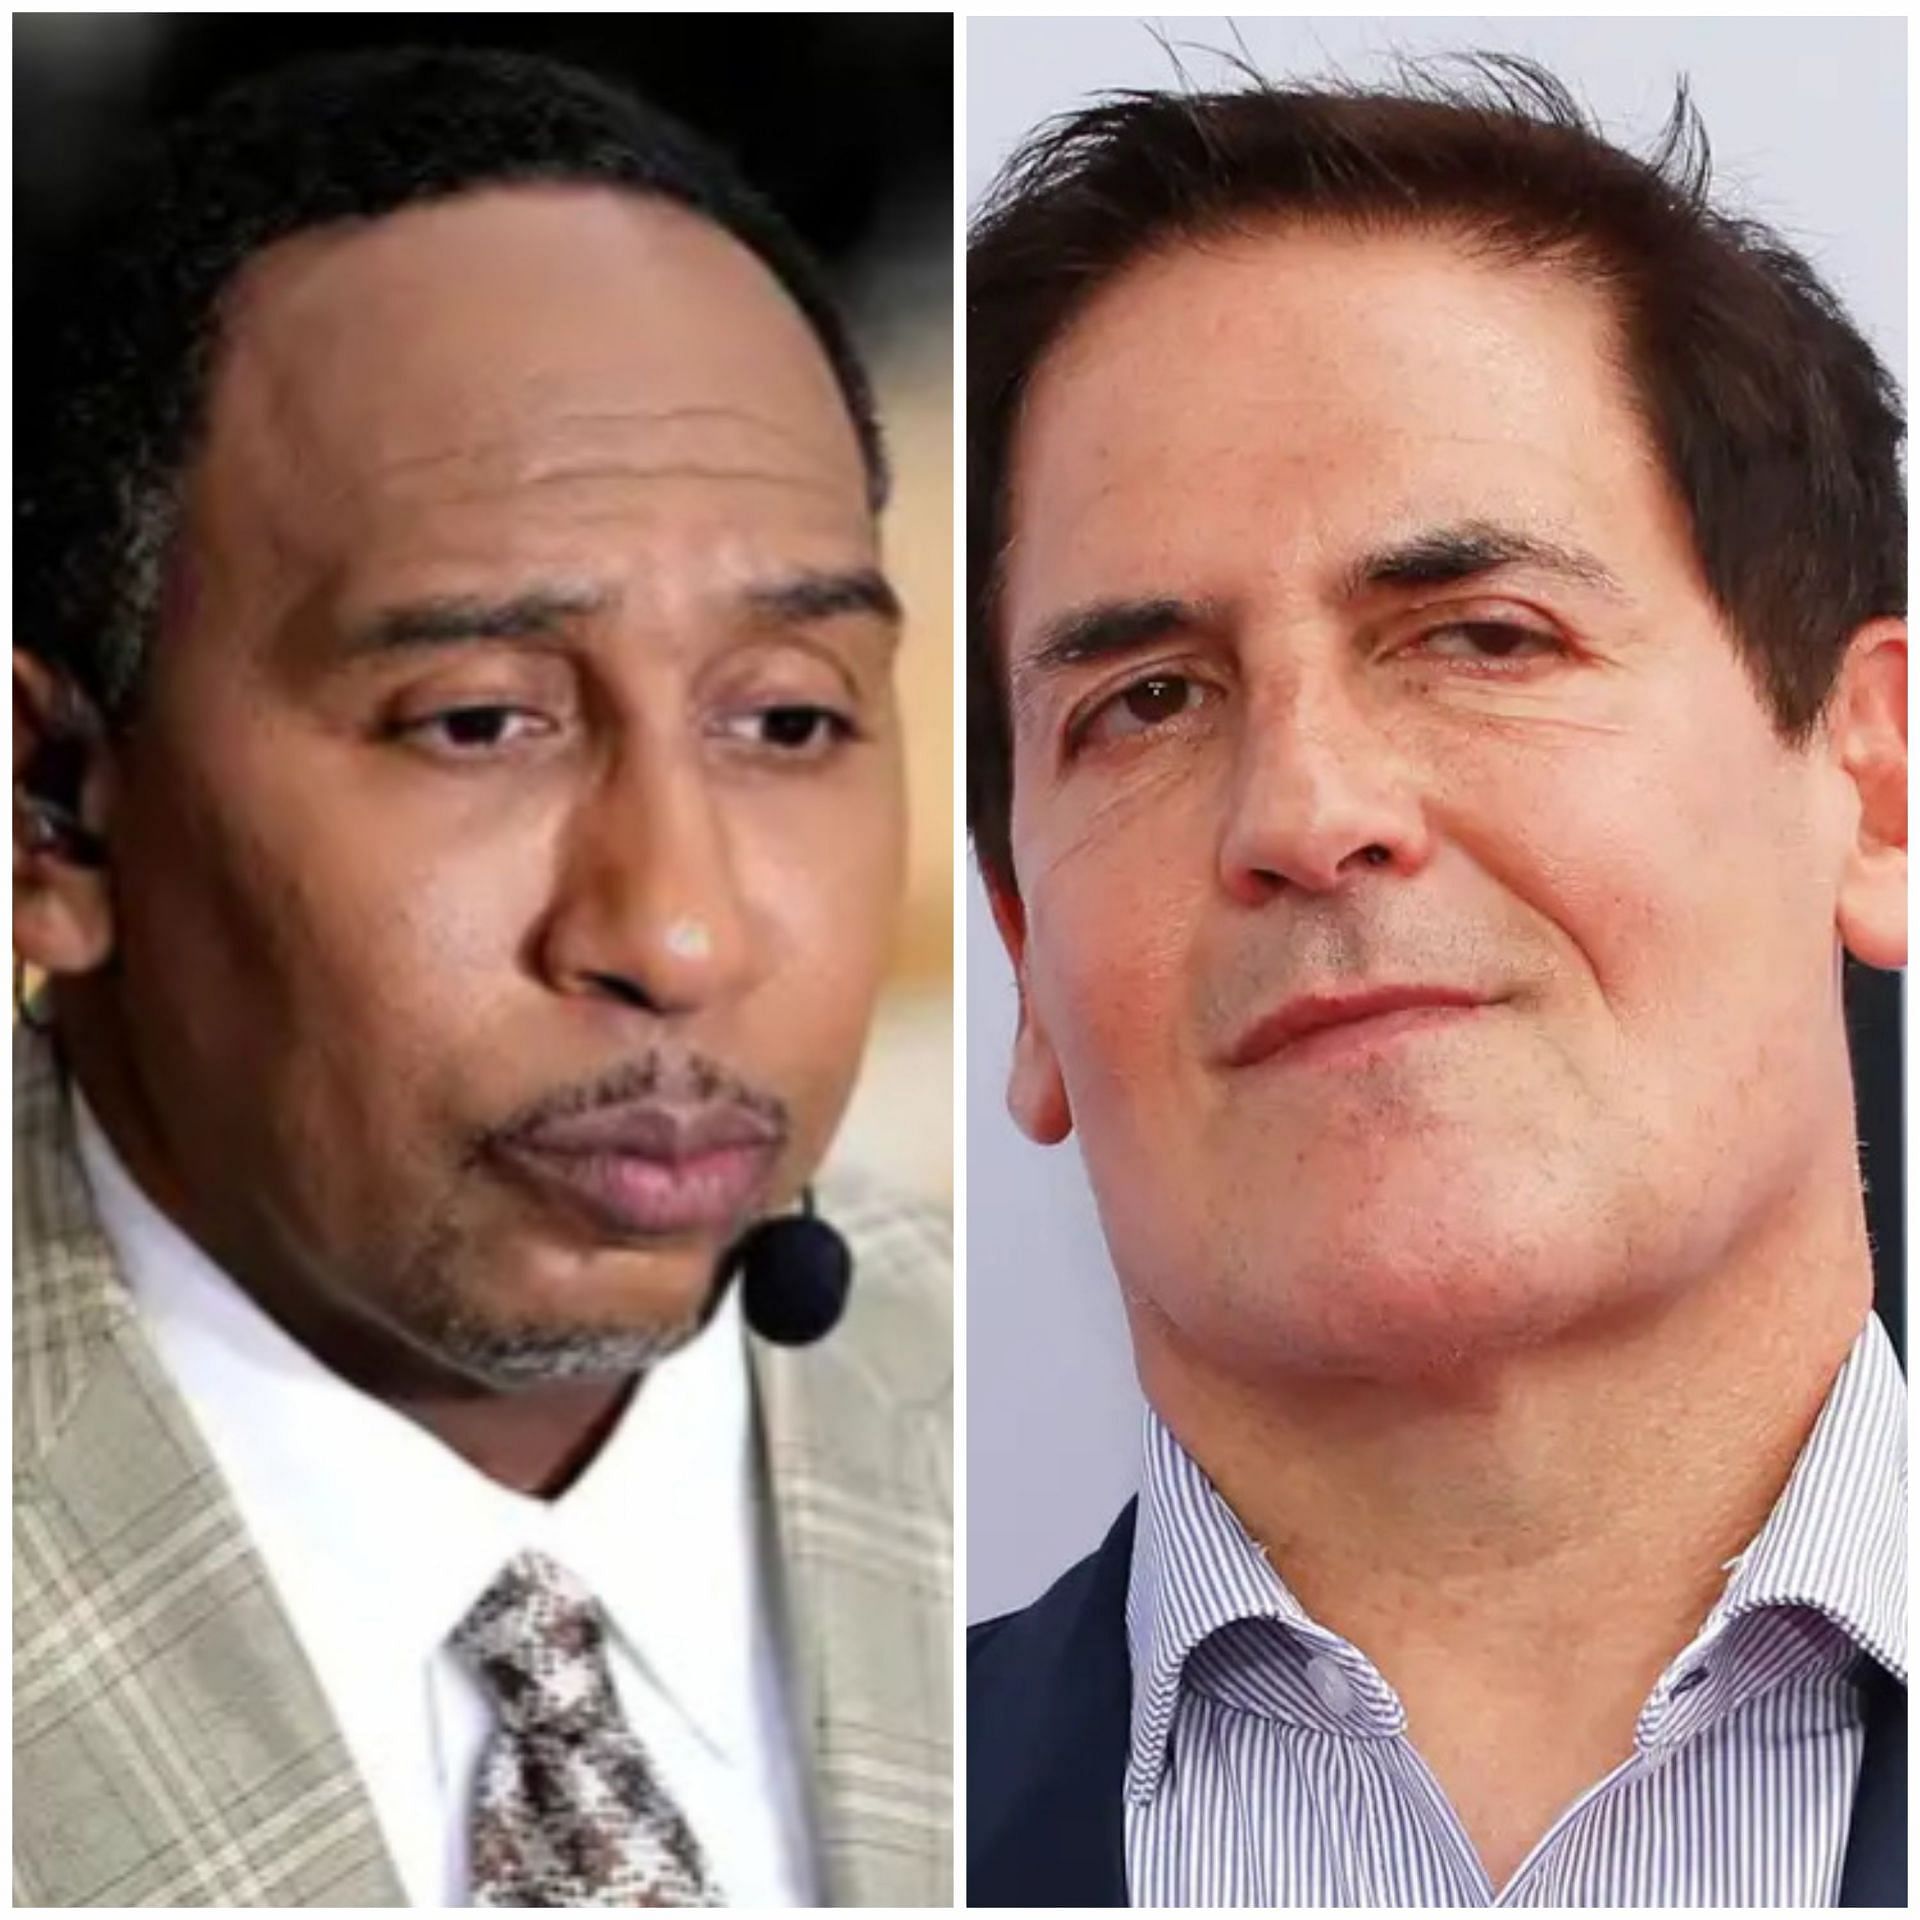 Stephen A Smith hilariously reveals a Shark Tank product he would pitch to Mark Cuban